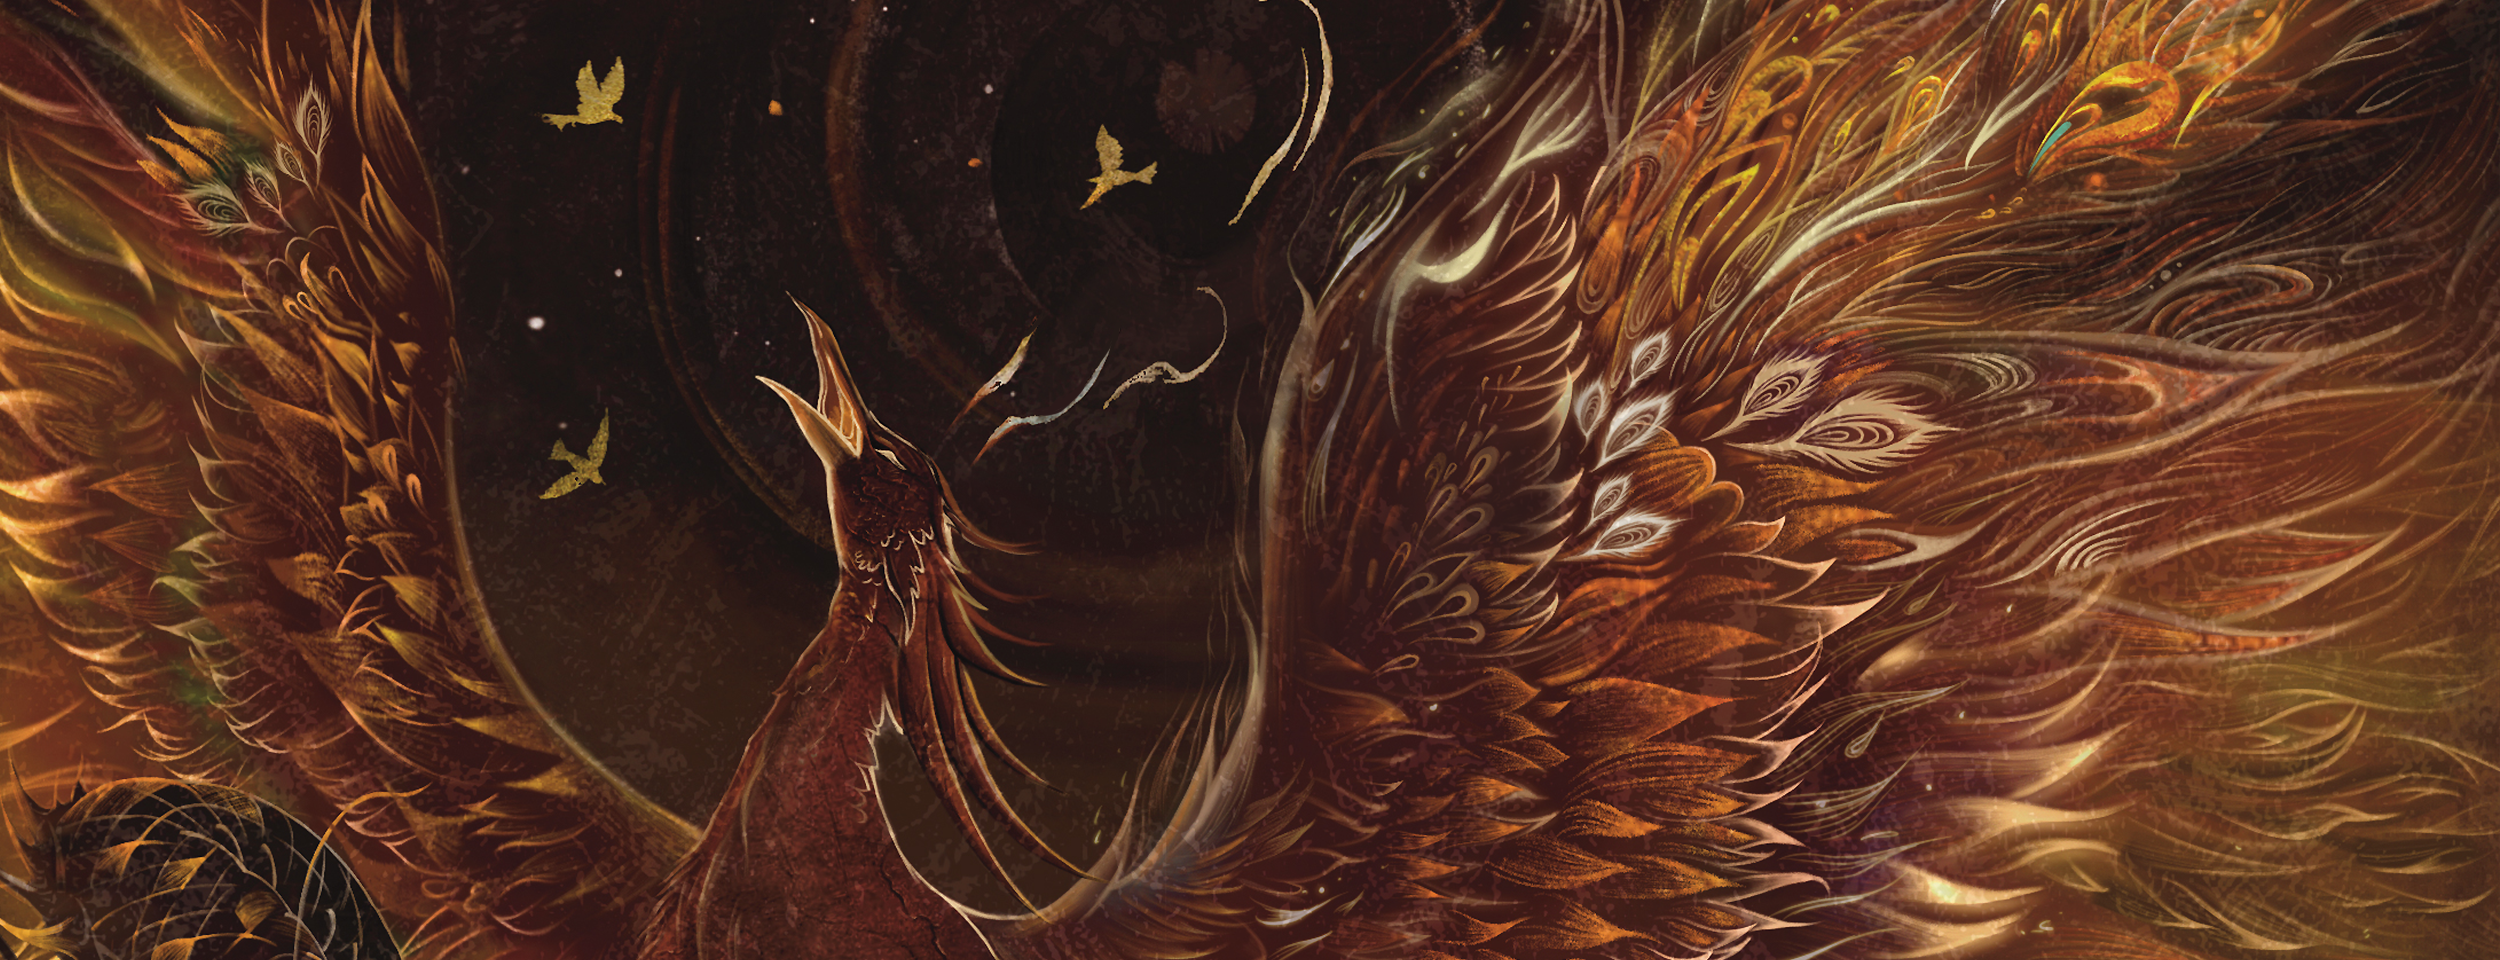 Photo Banner of the Phoenix Over Dragon Print by 淼淼森淼淼!